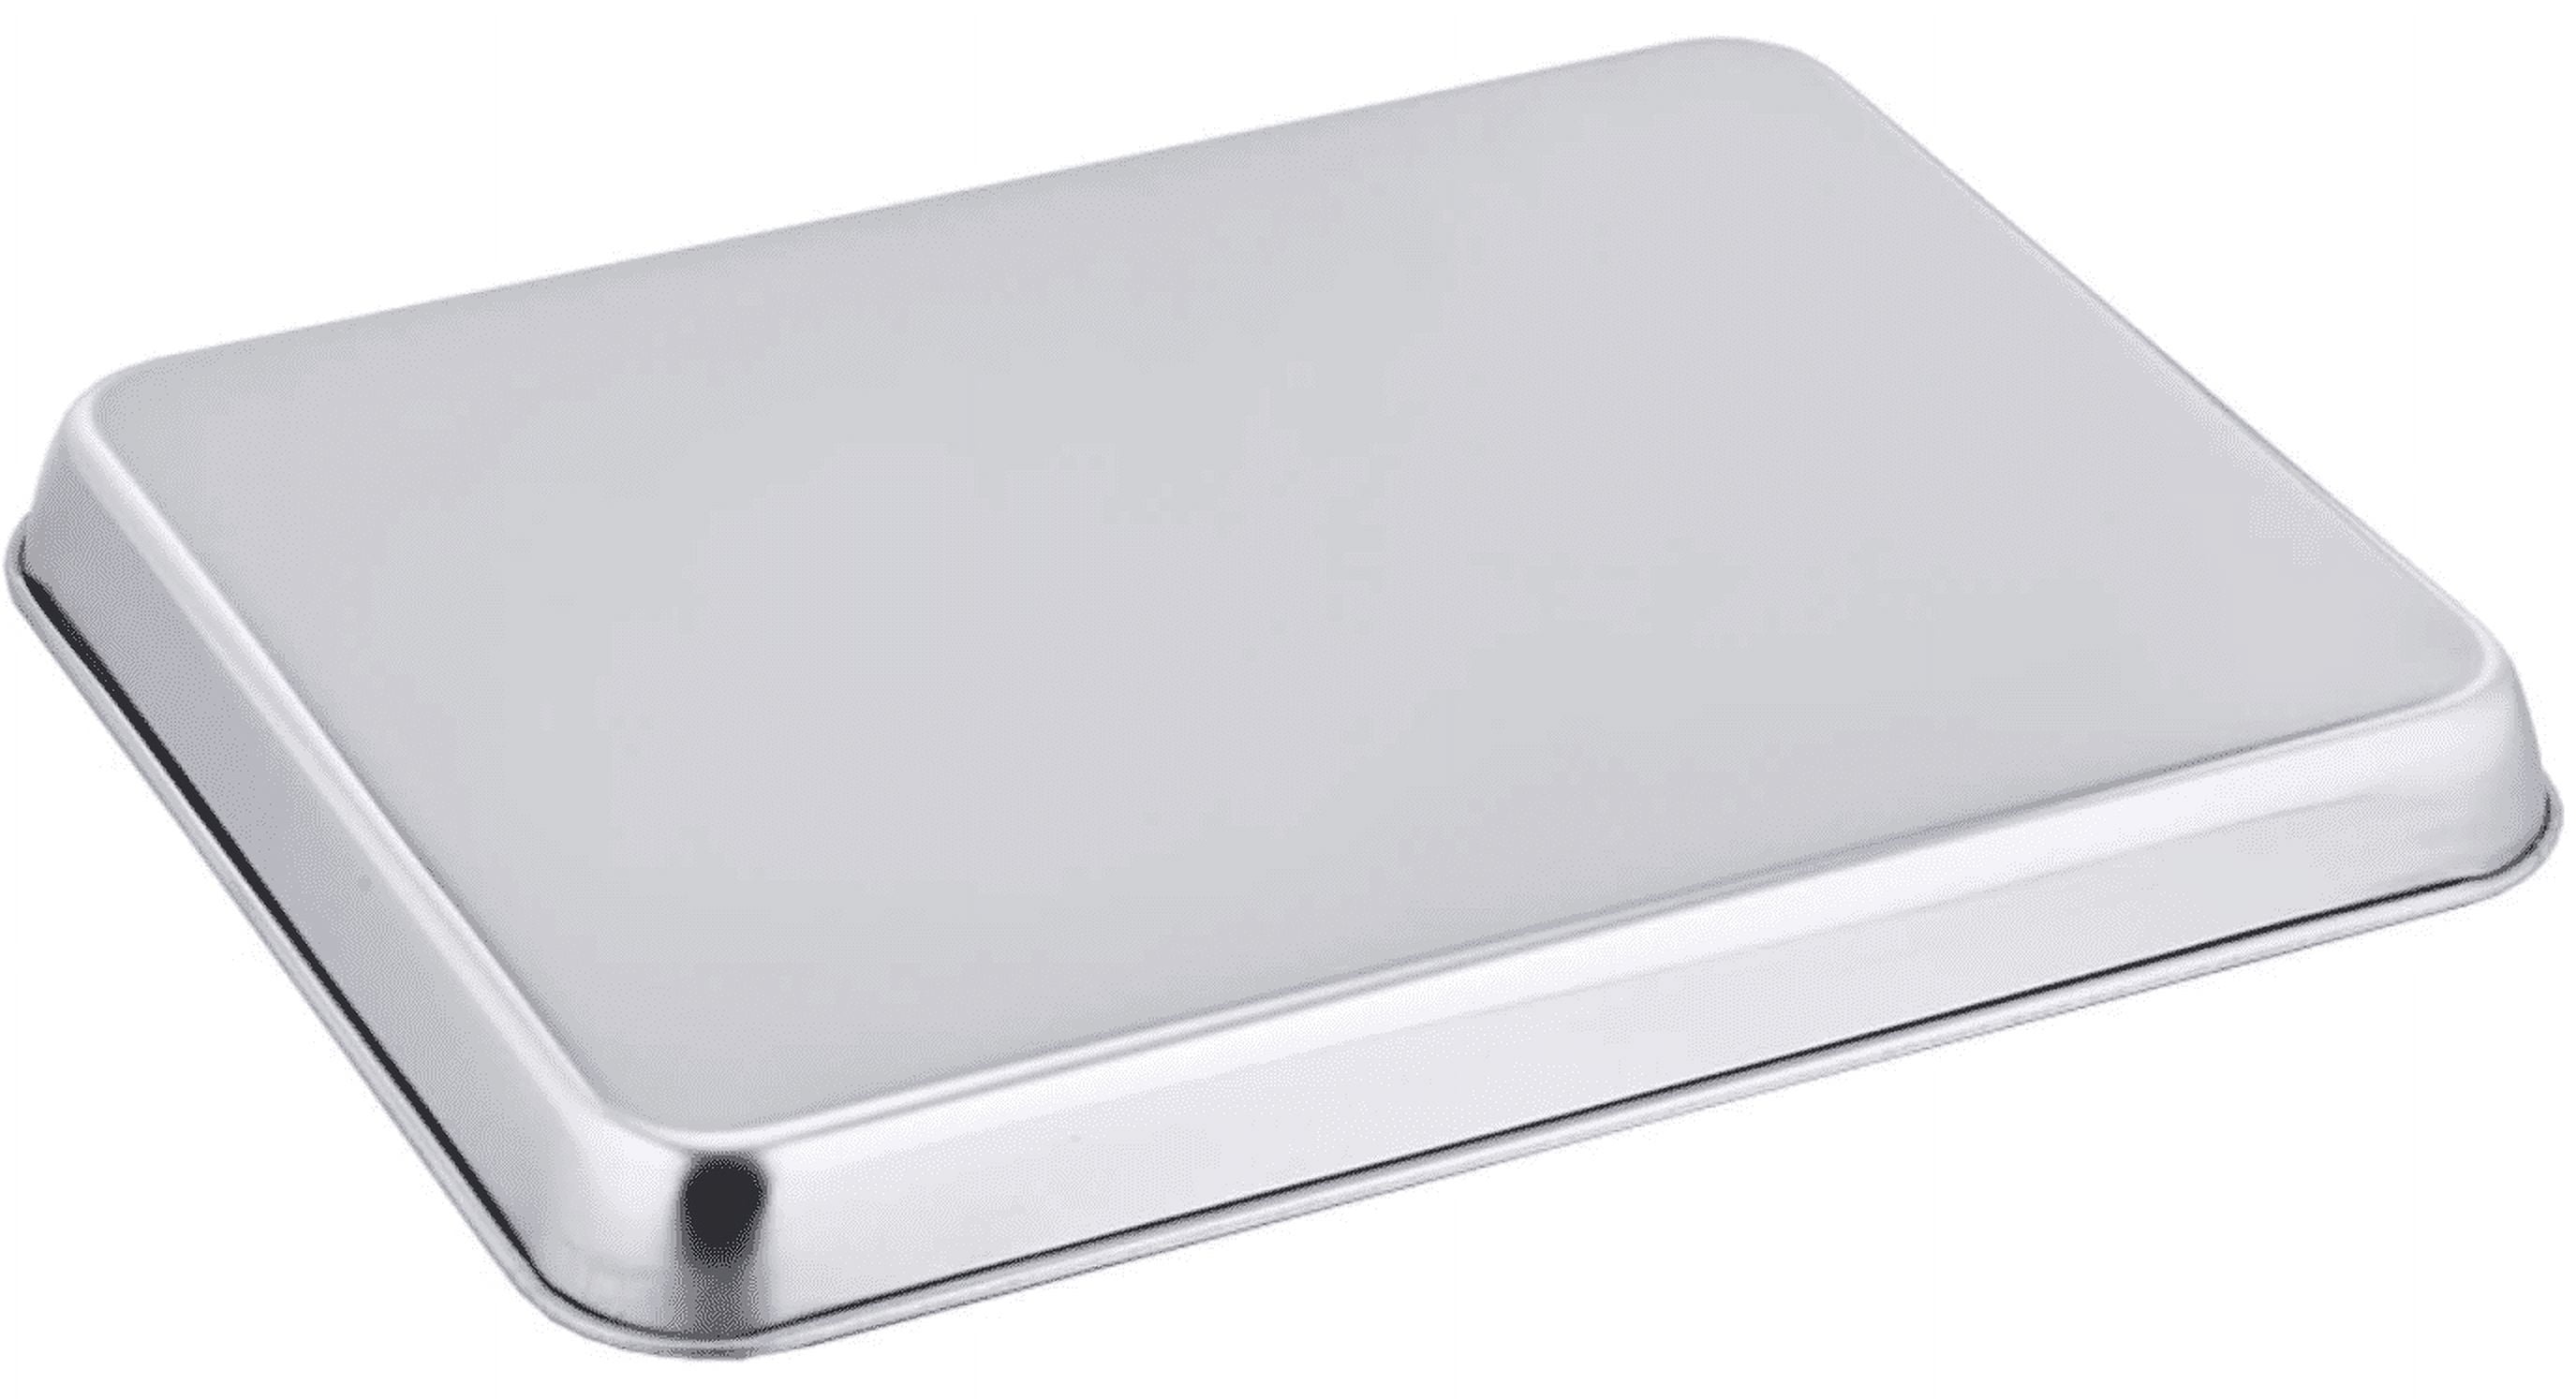 Small Baking Pan with Lid,Deep Baking Tray with Cover,Bexikou 9.4”x 7” x 2”  Stainless Steel Rectangle Sheet Cake Pans for Toaster Oven, Metal Covered